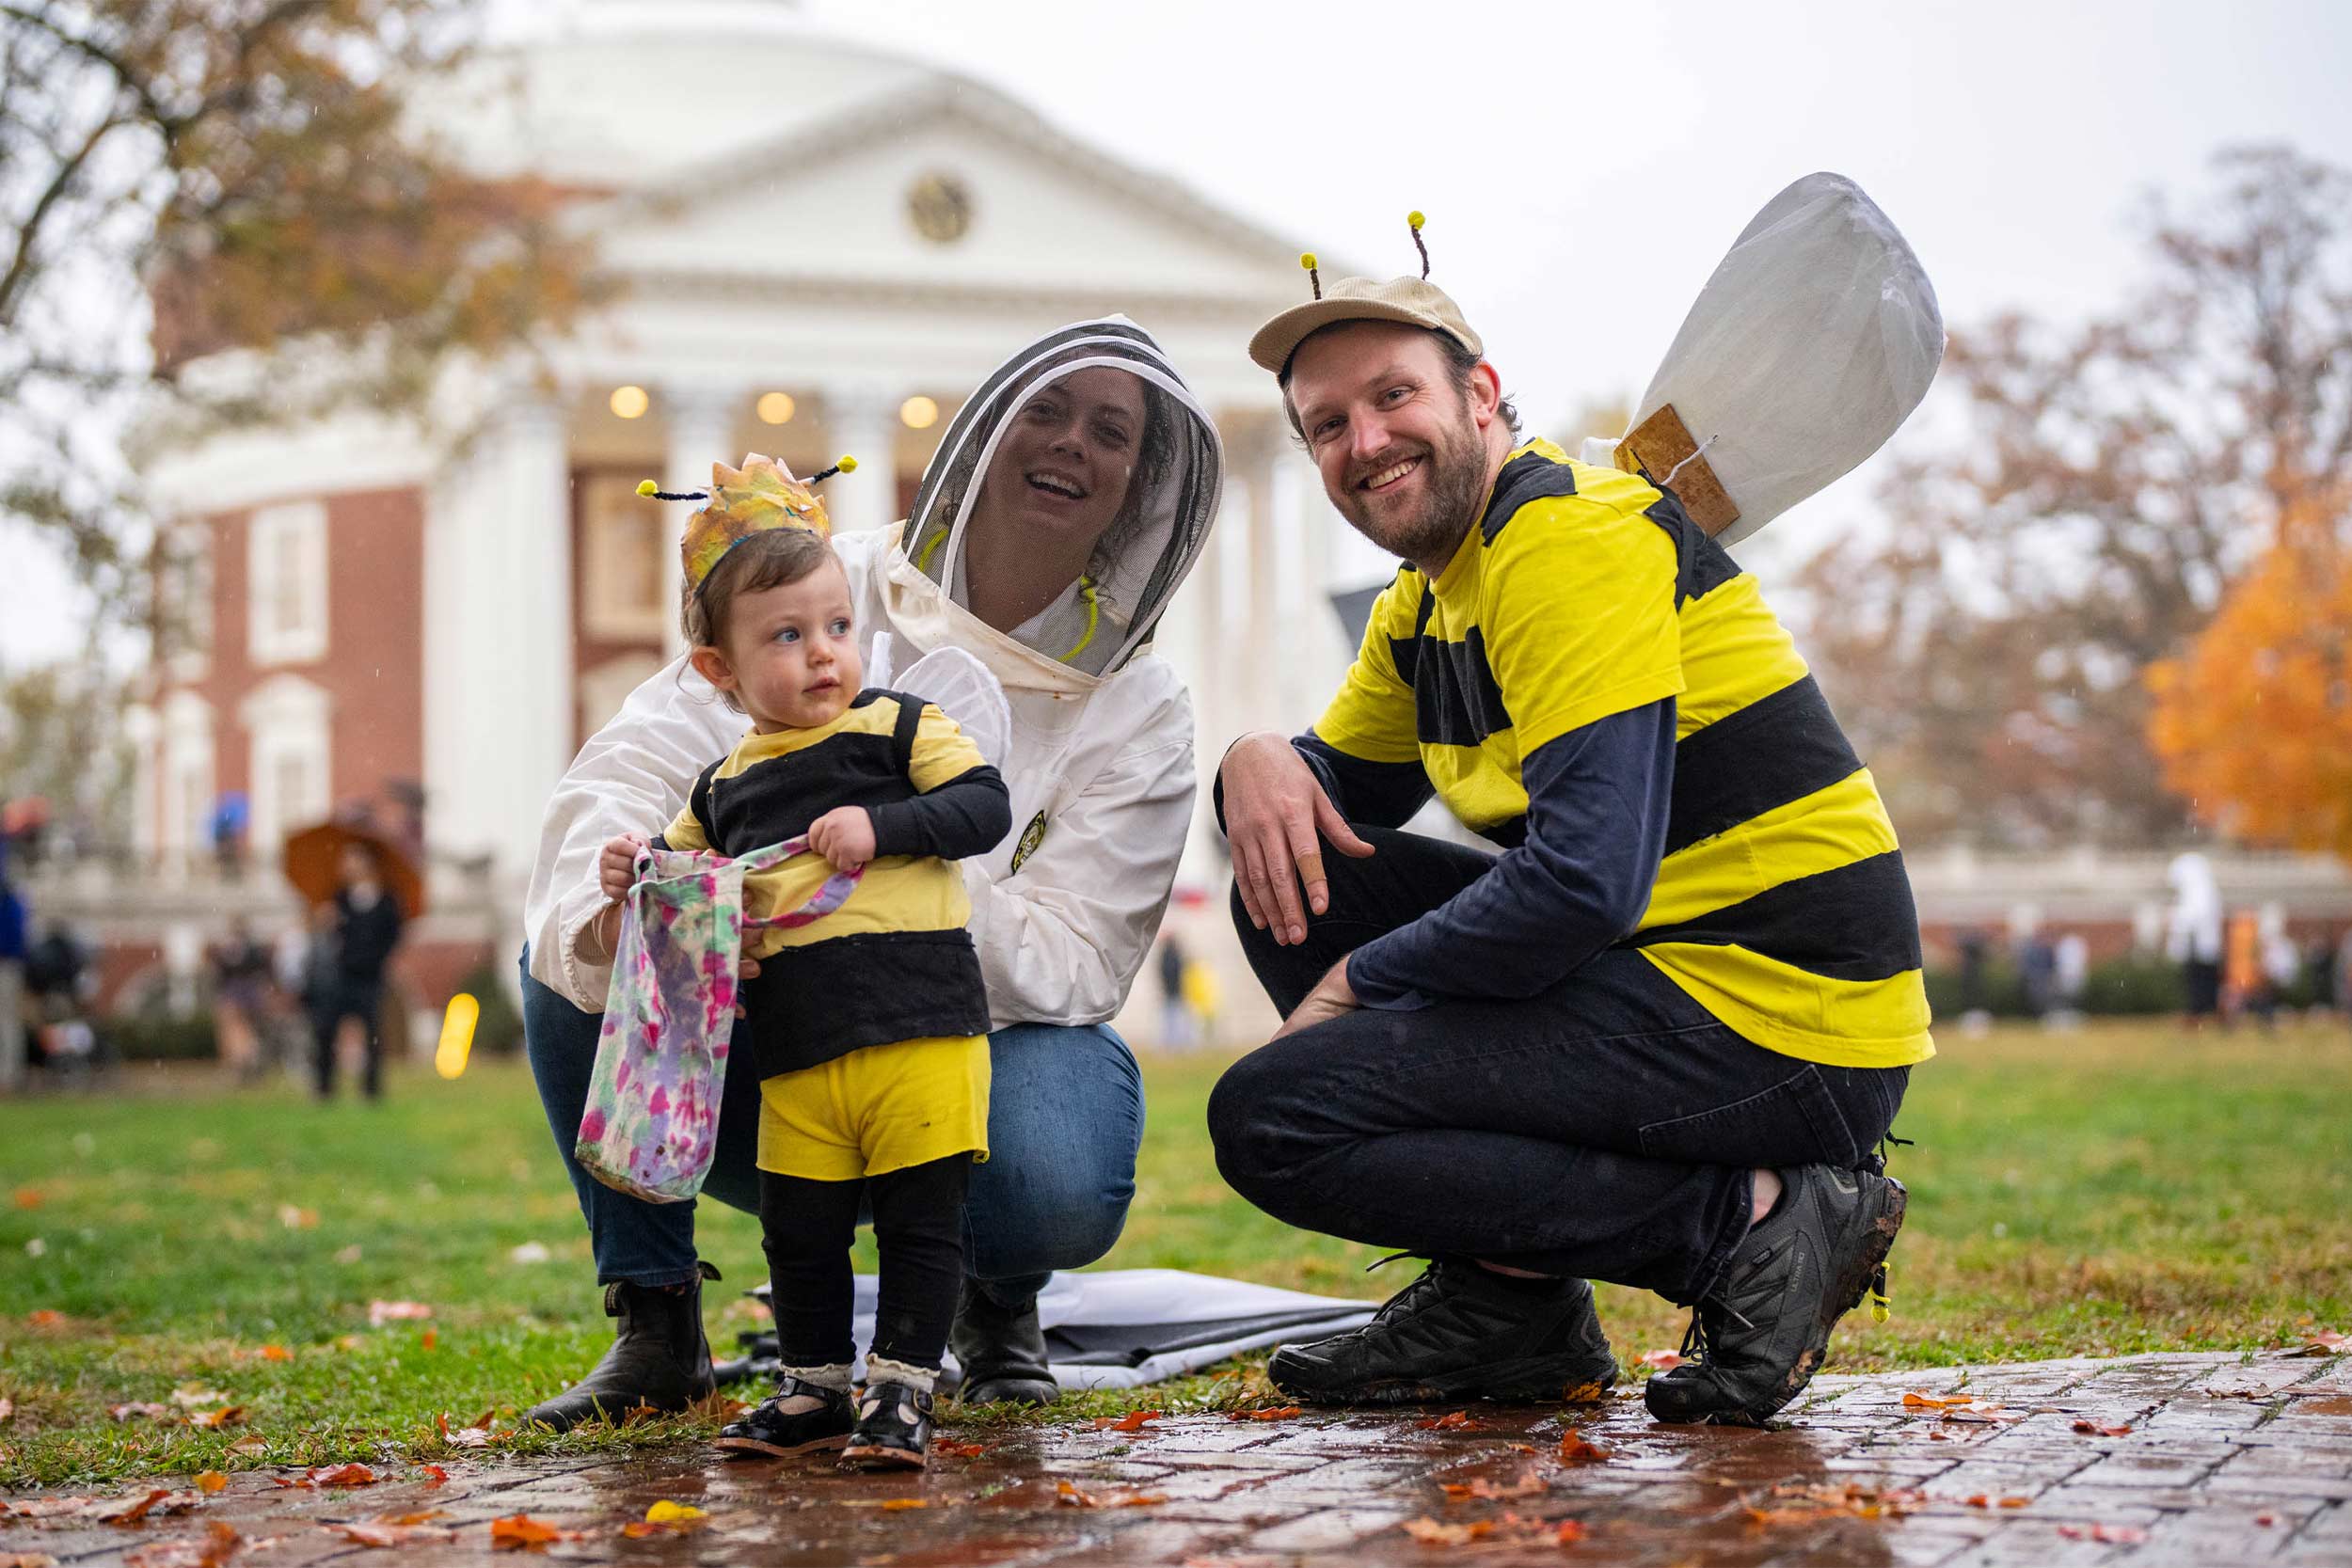 Mom dressed as a bee keeper and a man and a small dressed as bees